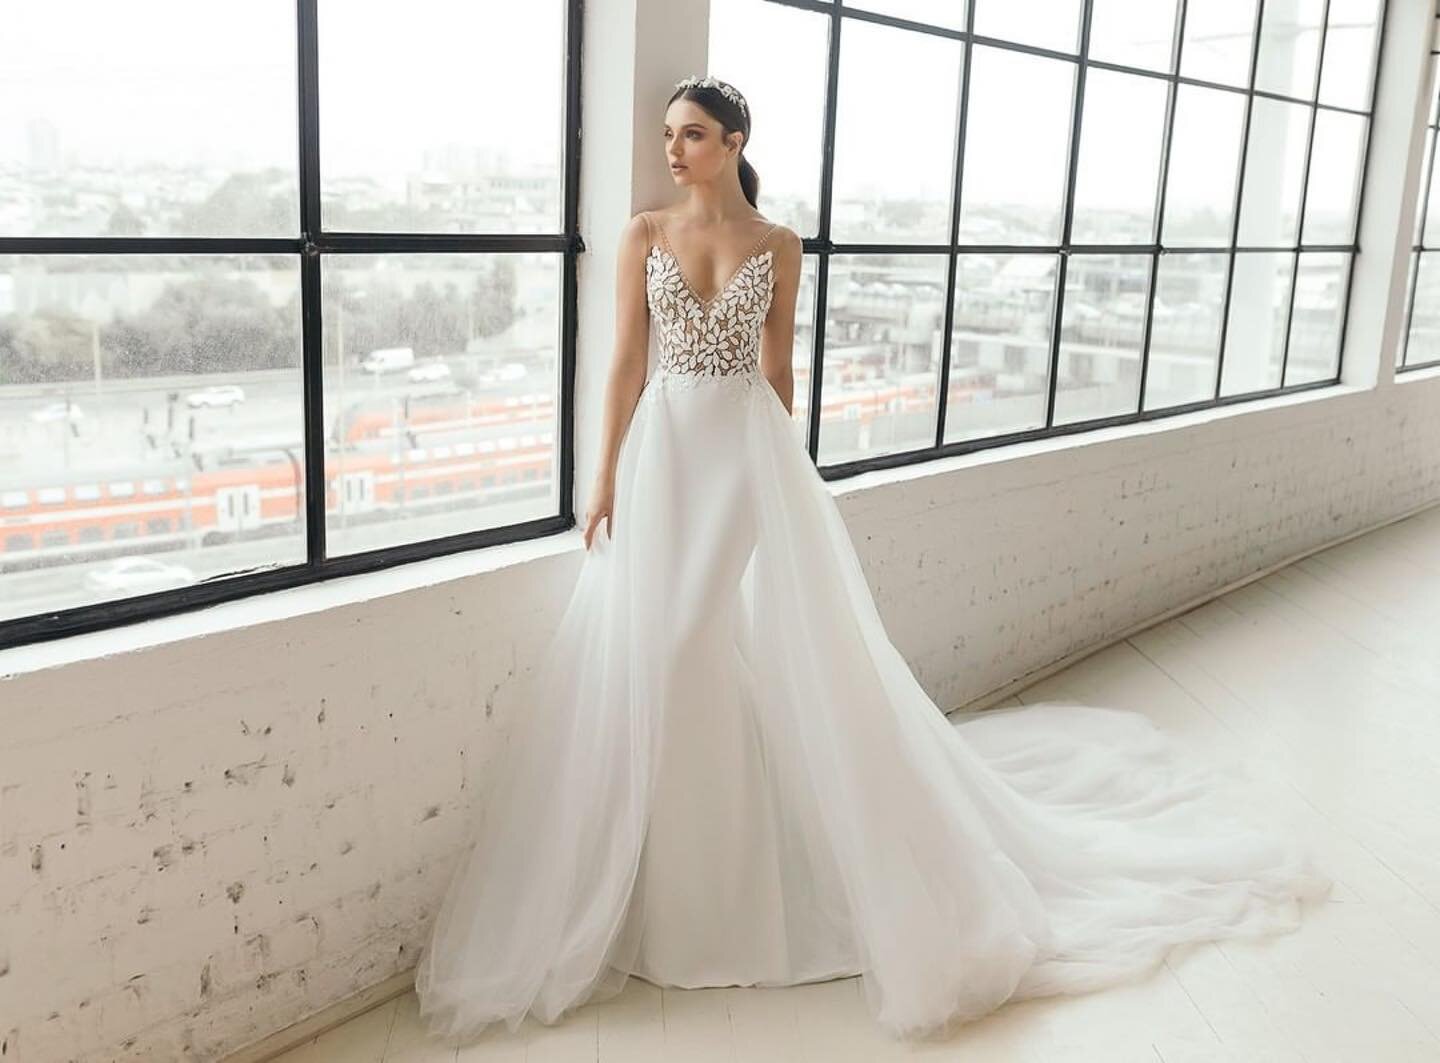 ❤️❤️❤️❤️❤️❤️❤️❤️❤️❤️❤️ In my 9 years of experience dressing women, most brides don&rsquo;t fully understand they can have two bridal gowns in one with amazing detachable trains like this one on sale now. Take the pressure off yourself and allow yours